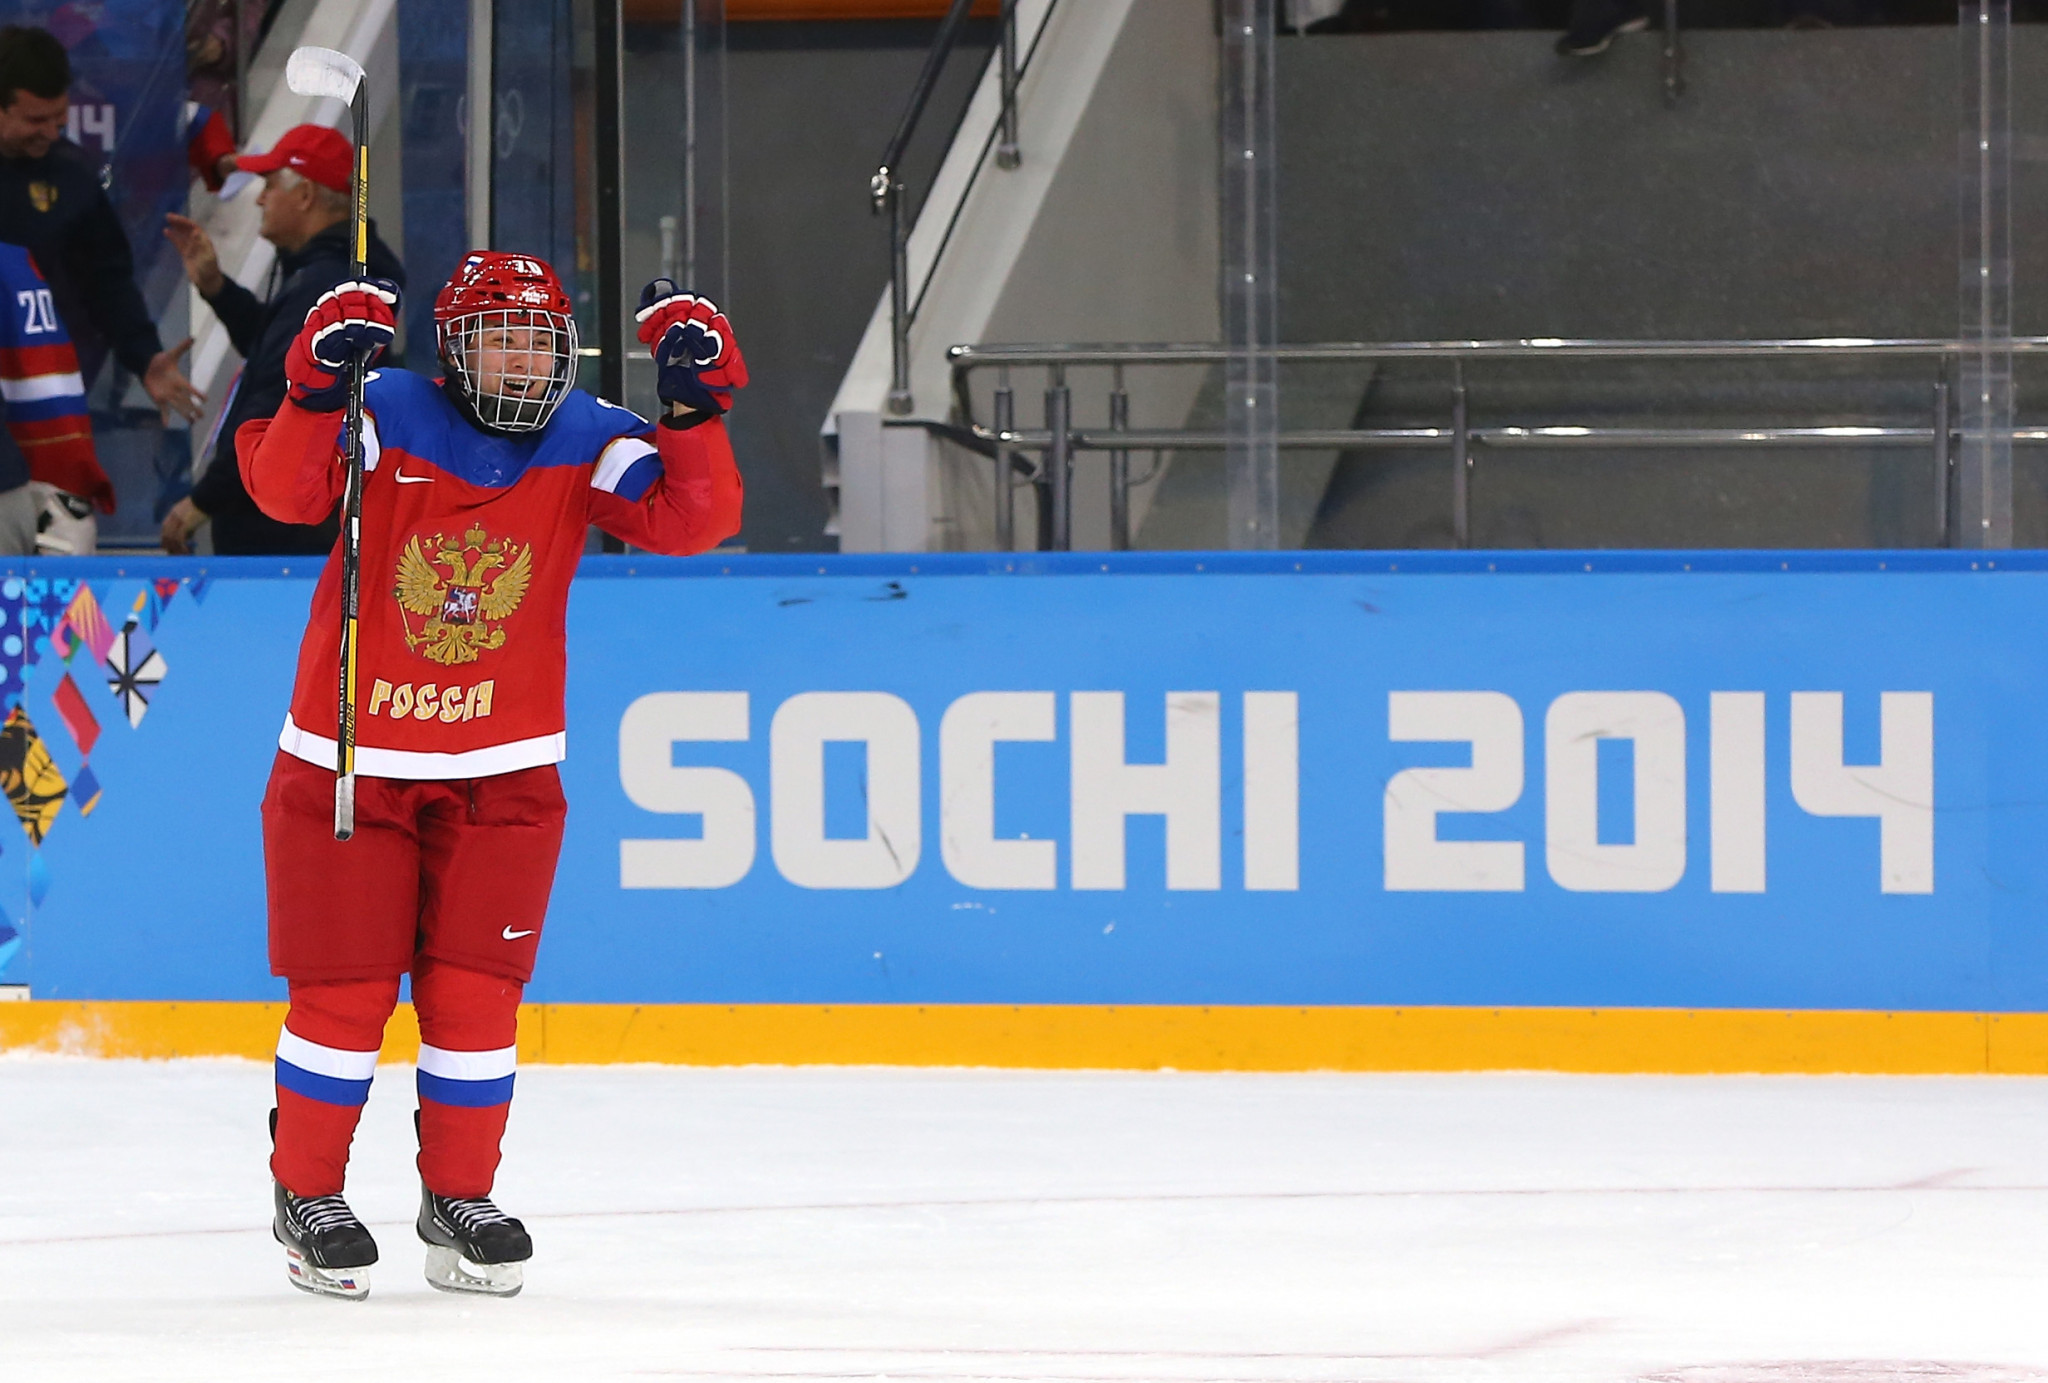 Anna Shibanova is among the six Russian ice hockey players sanctioned by the IOC ©Getty Images